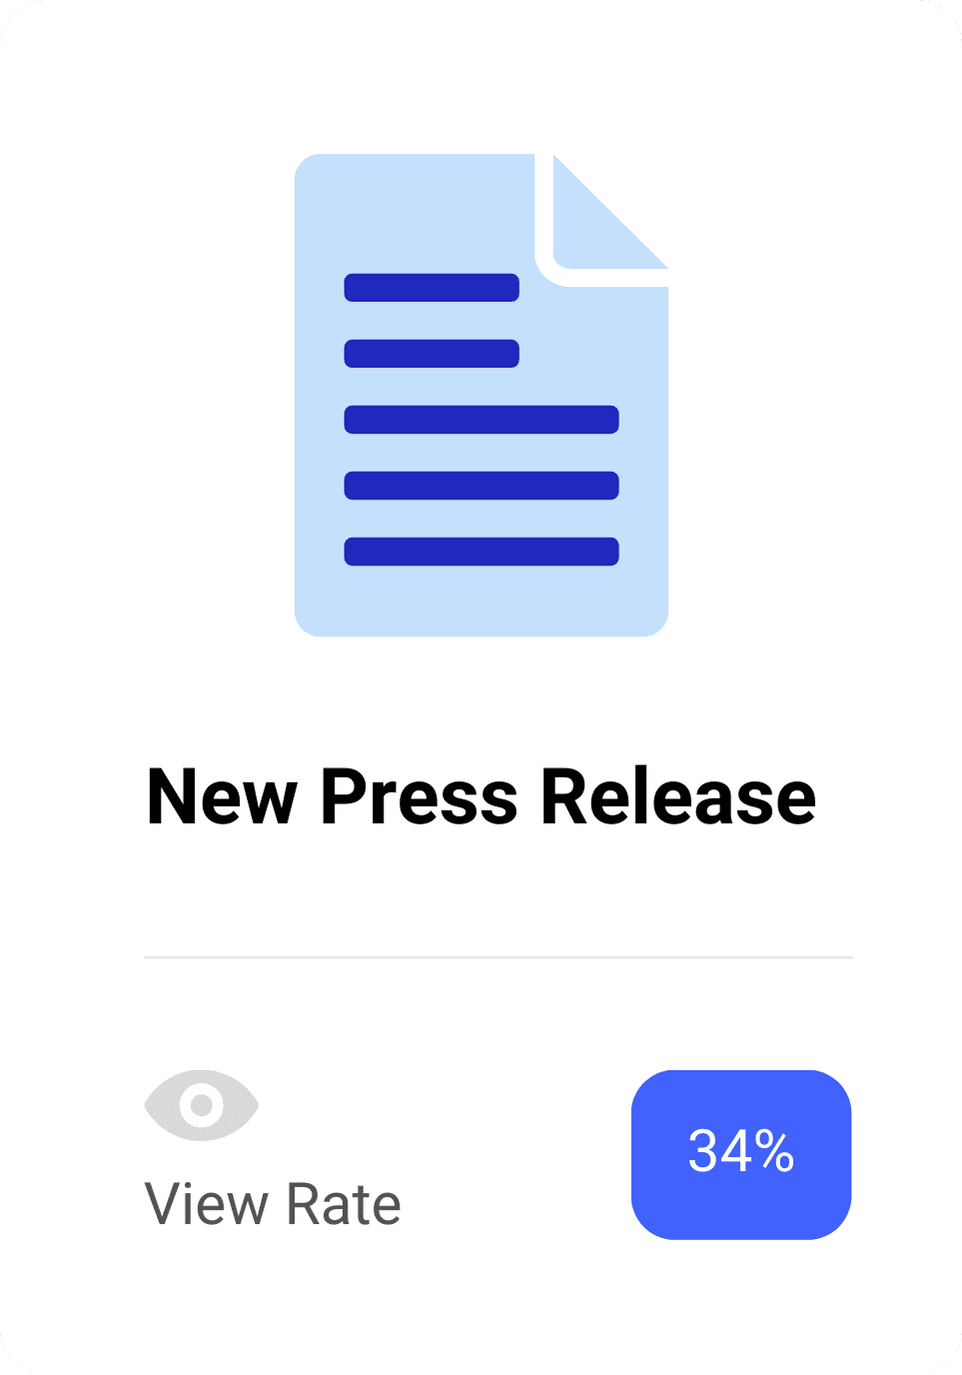 New press release view rate abstract graphic